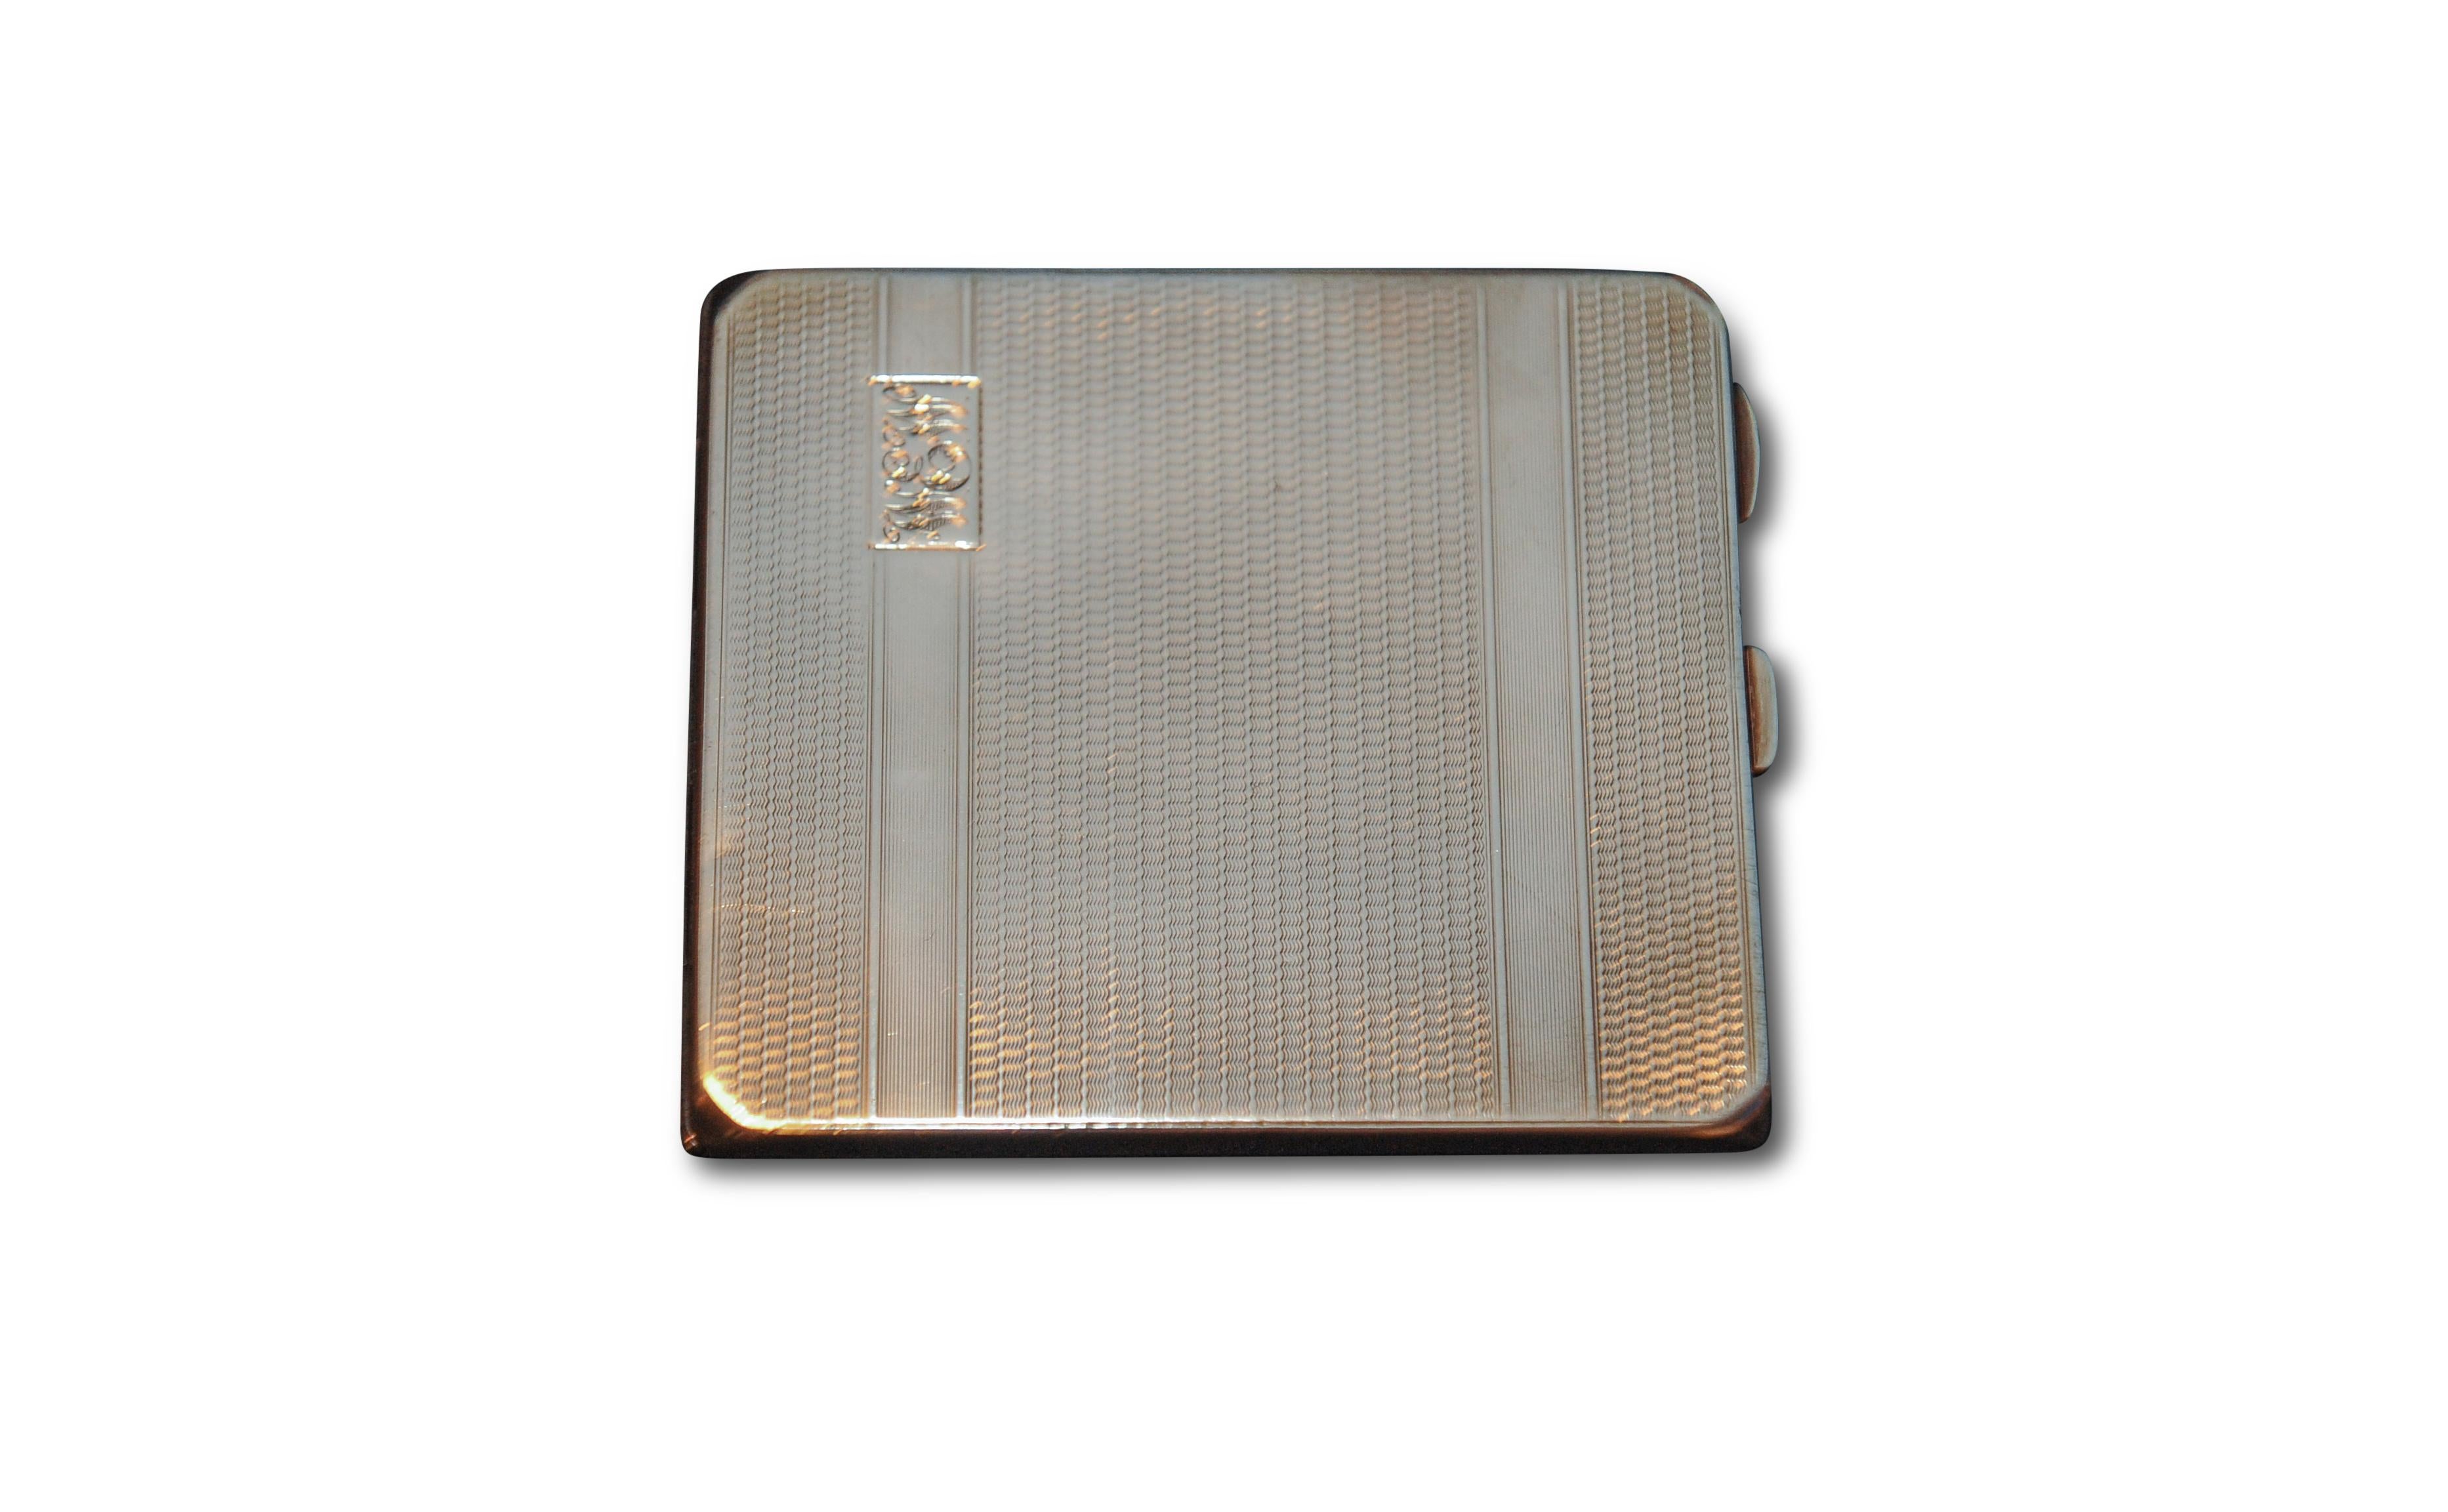 Art Deco 1931 solid silver cigarette case with monogram by Adie Brothers of Birmingham England.

Case has been monogrammed as seen in image. Also includes the original inner strap to hold the cigarettes.

(Peaky Blinders enthusiasts will love this